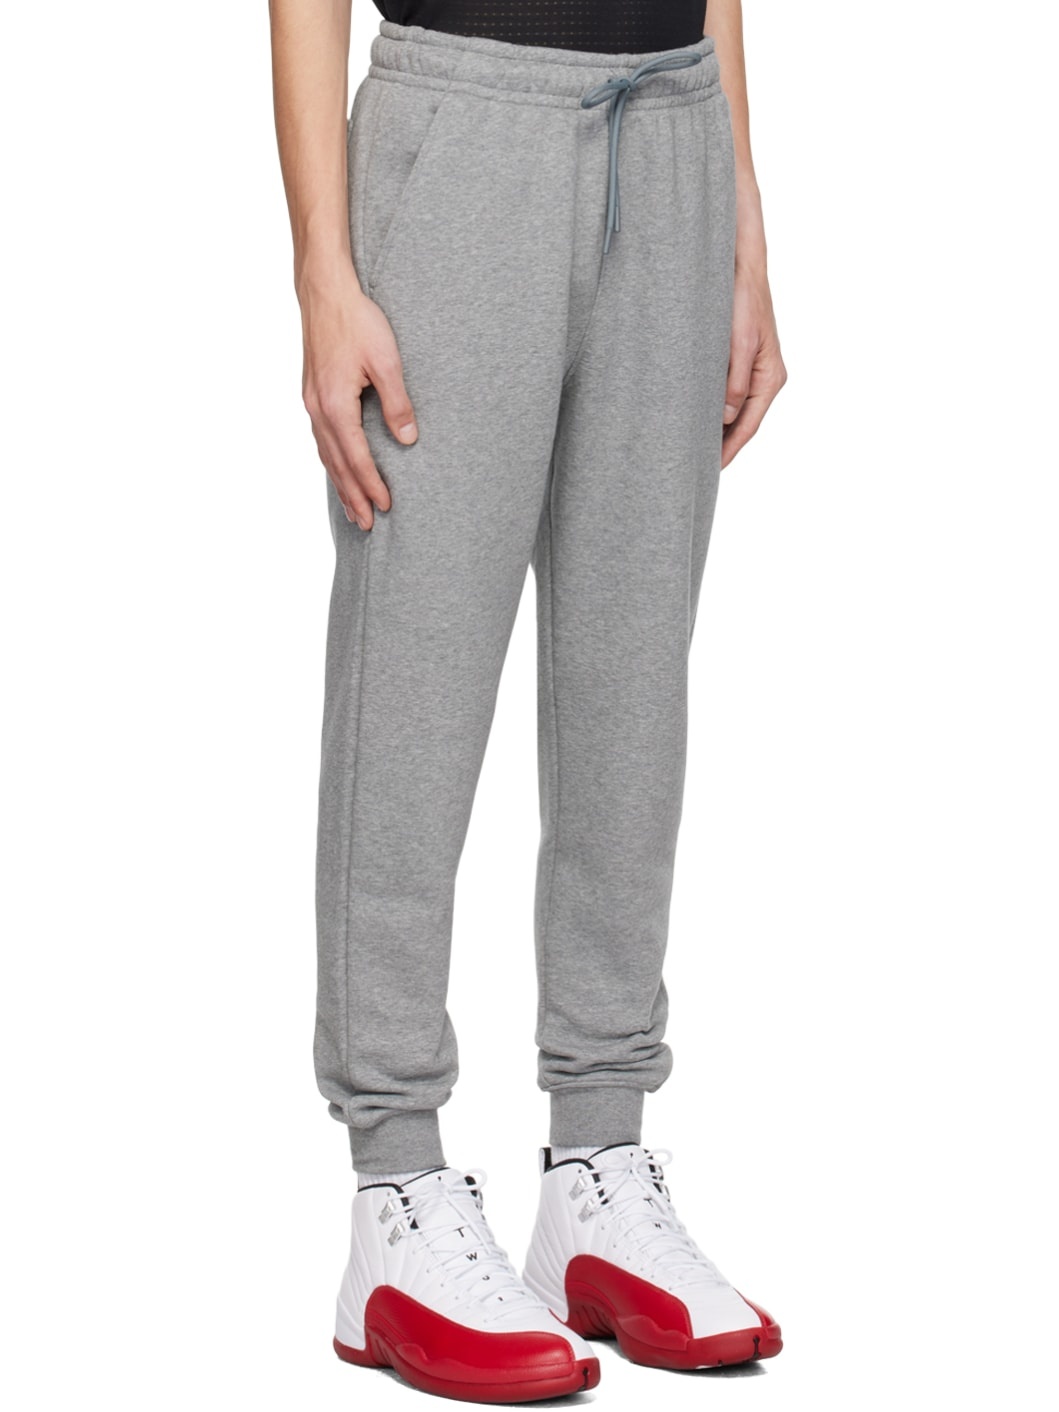 Gray Embroidered Sweatpants - 2